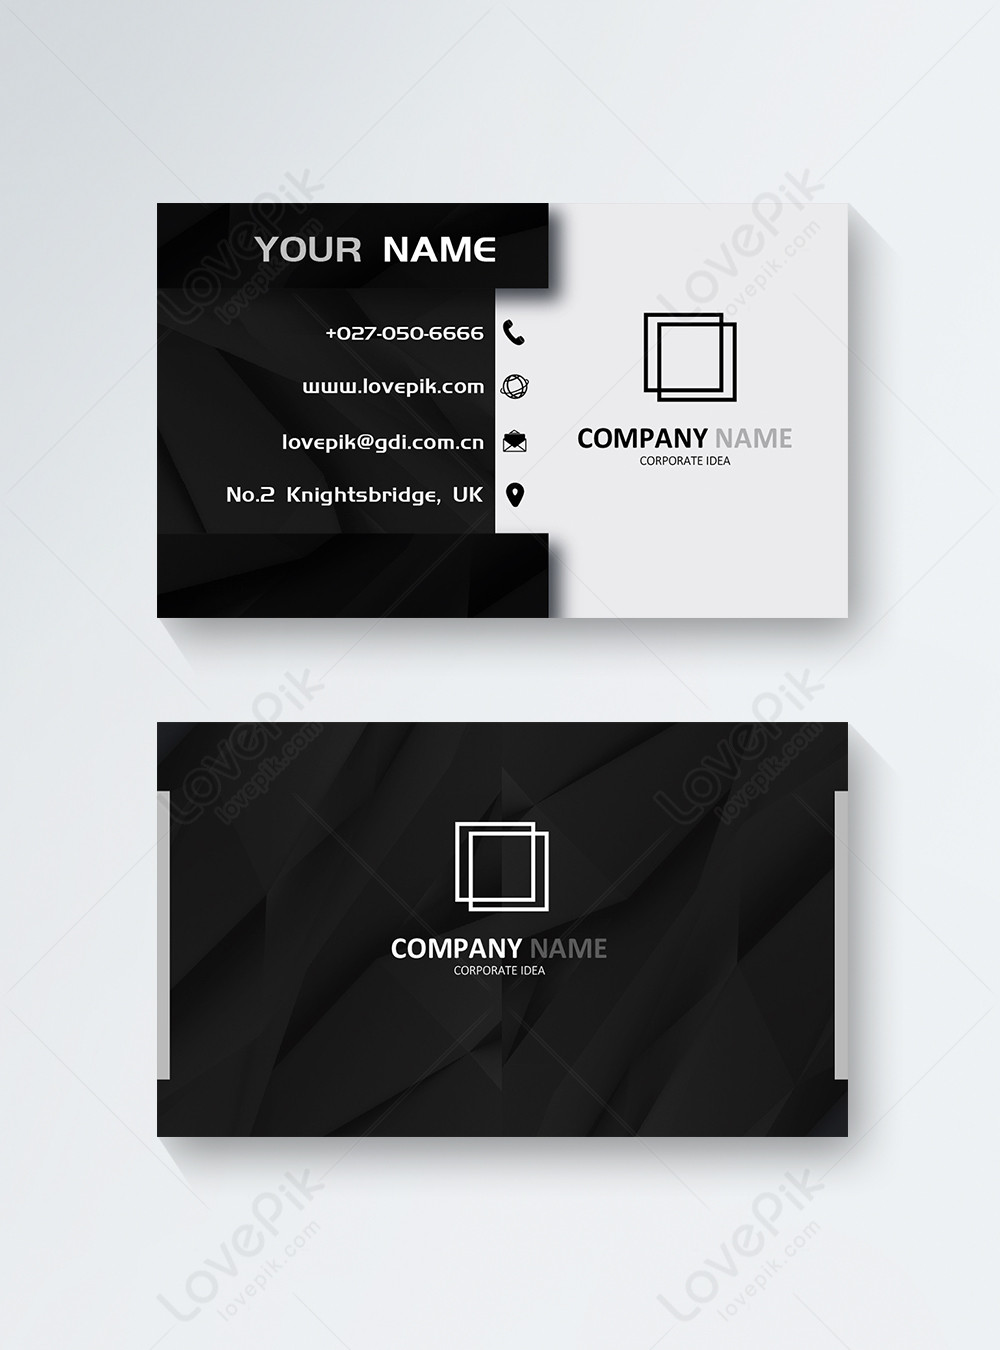 Business card template image_picture free download 450000370_lovepik.com